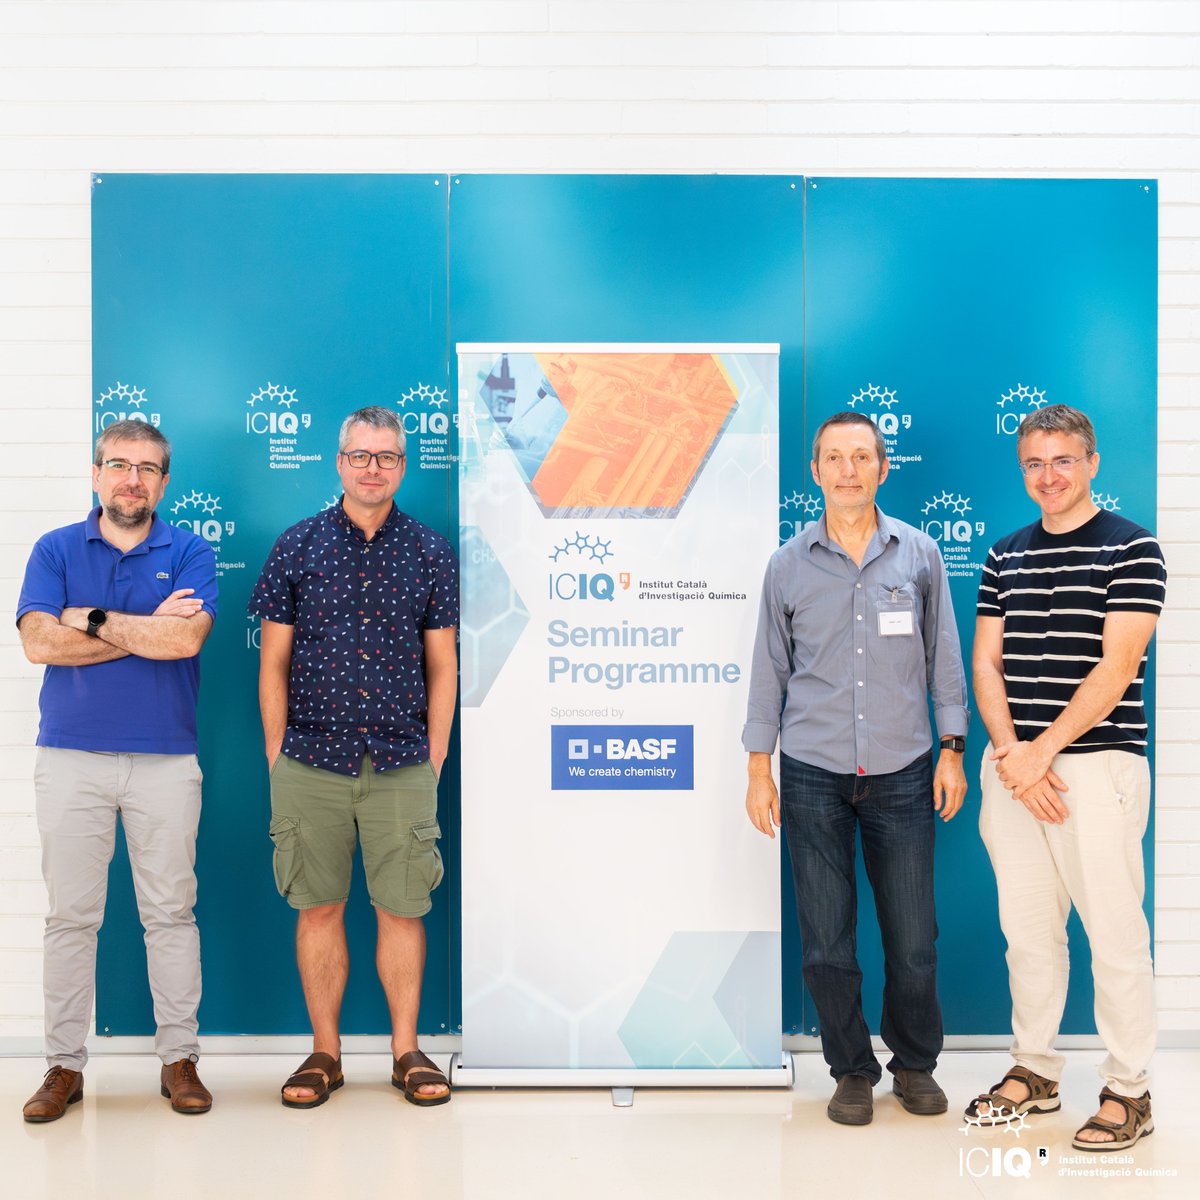 #ICIQSeminar 👏Thank you Prof. Vladimir Gevorgyan @GevorgyanLab from @UT_Dallas for delivering an outstanding seminar today on the advancements in the field of C-H functionalization methodologies 🔵Special thanks to our sponsor @BASF_ES @iCERCA @SOMM_alliance